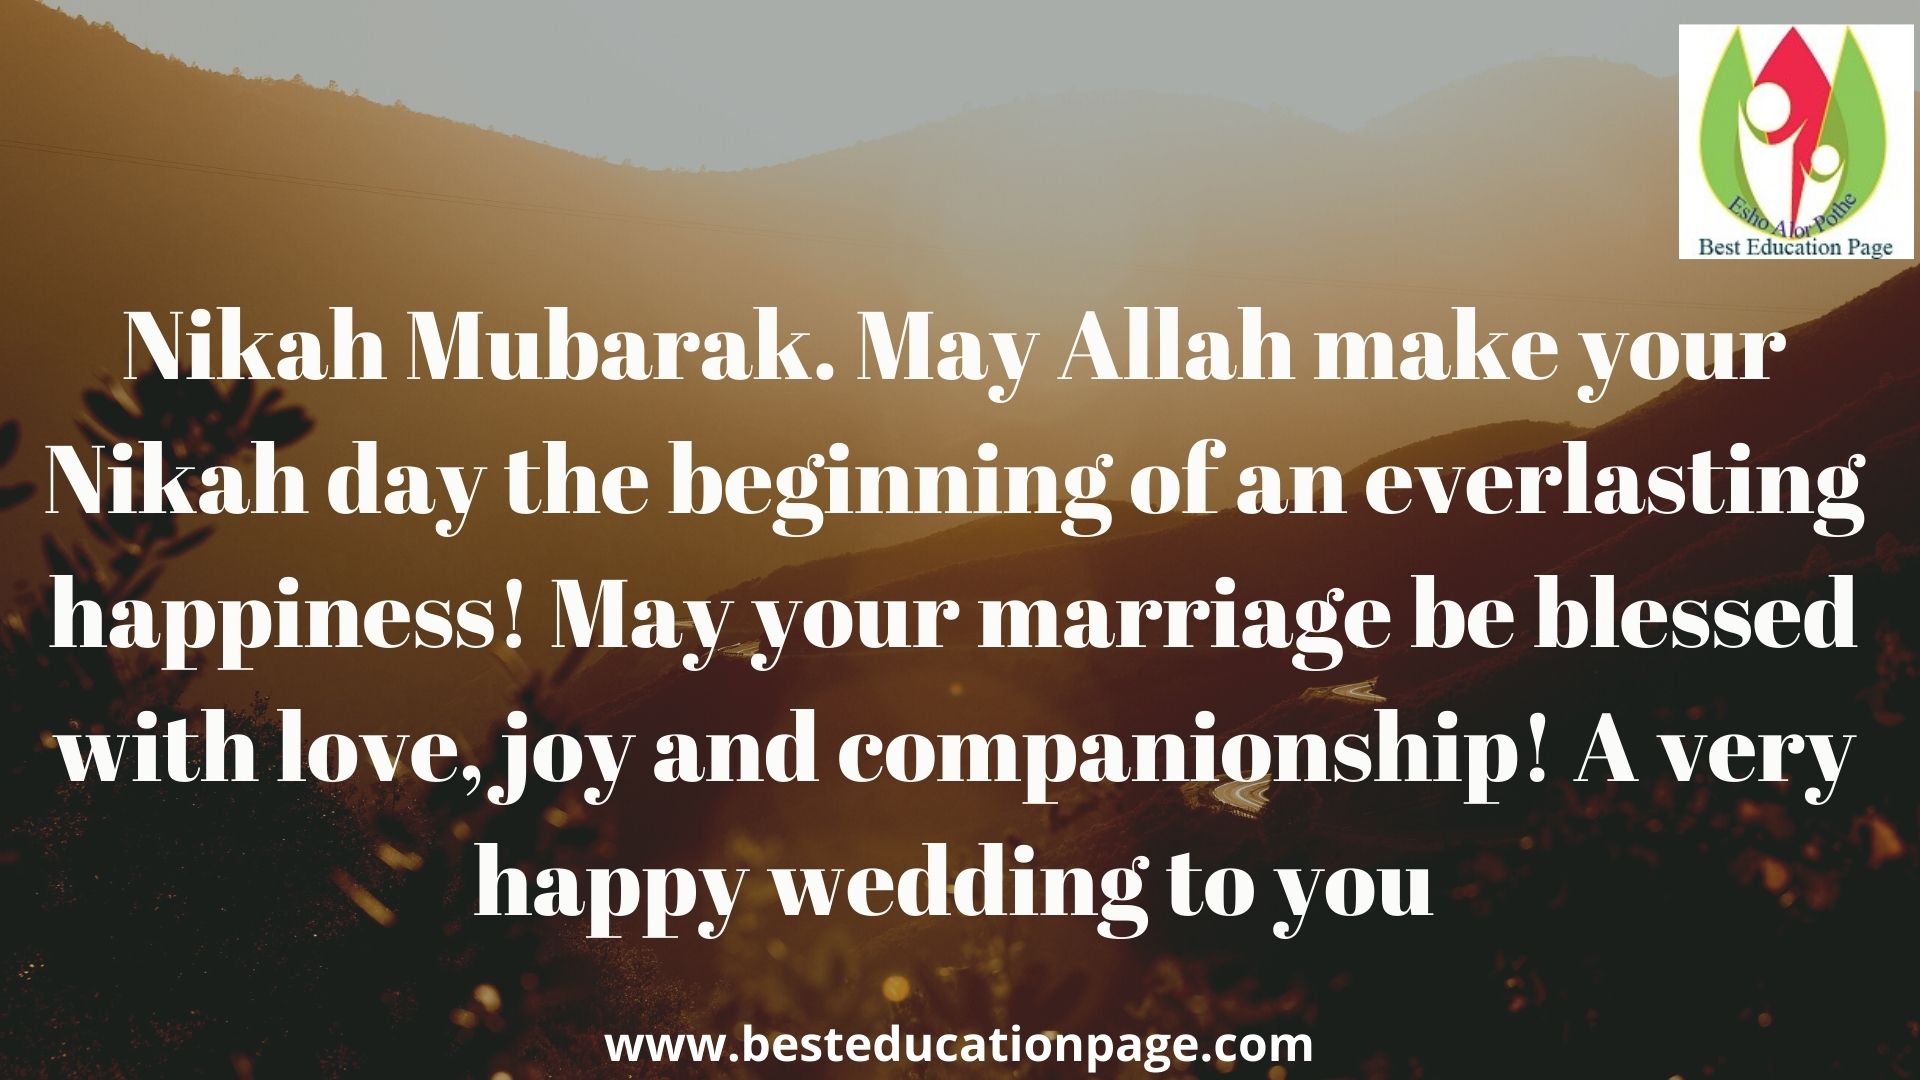 Nikah Mubarak. May Allah make your Nikah day the beginning of an everlasting happiness! May your marriage be blessed with love, joy and companionship! A very happy wedding to you